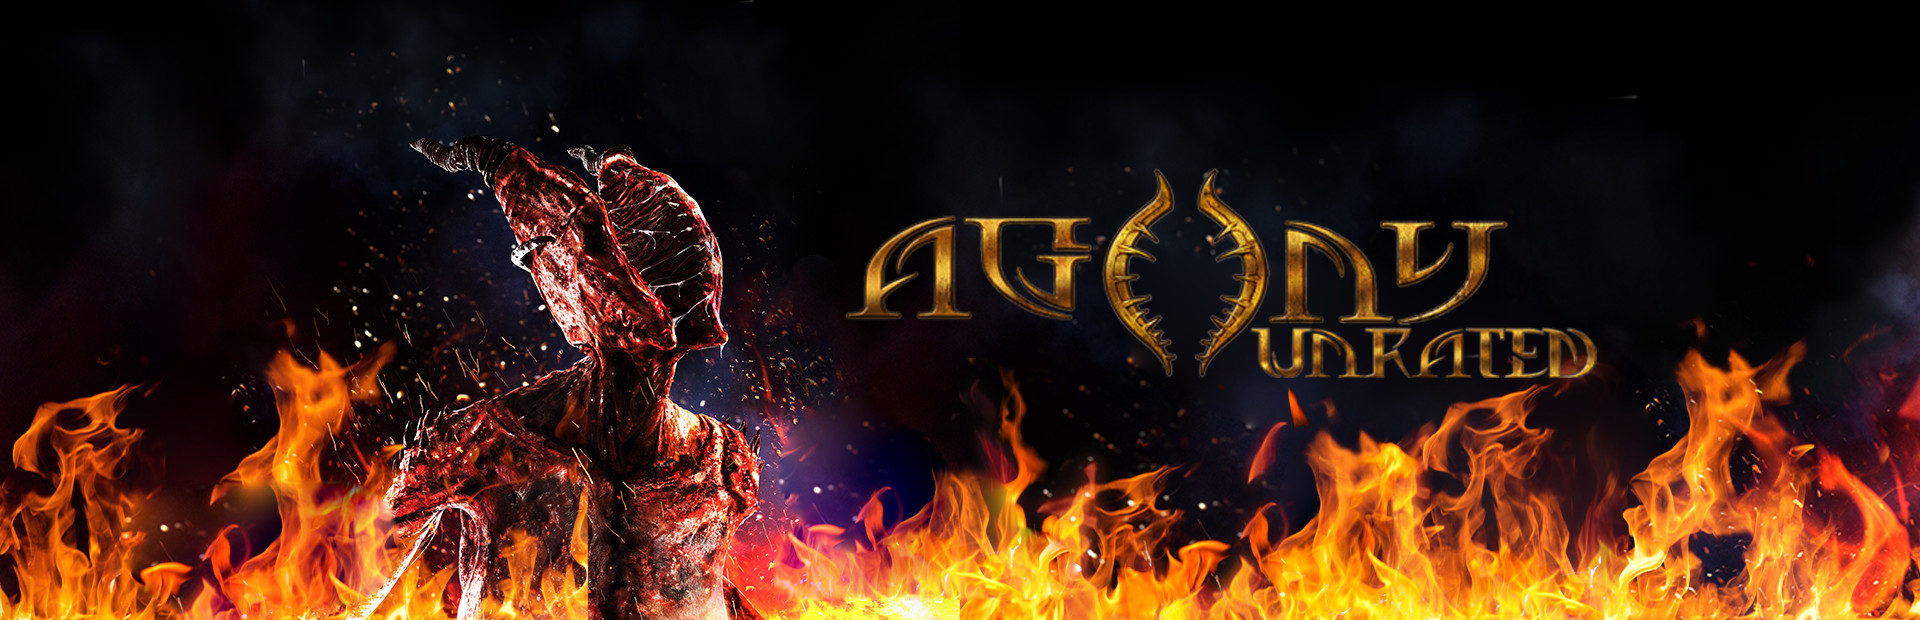 Agony UNRATED cover image